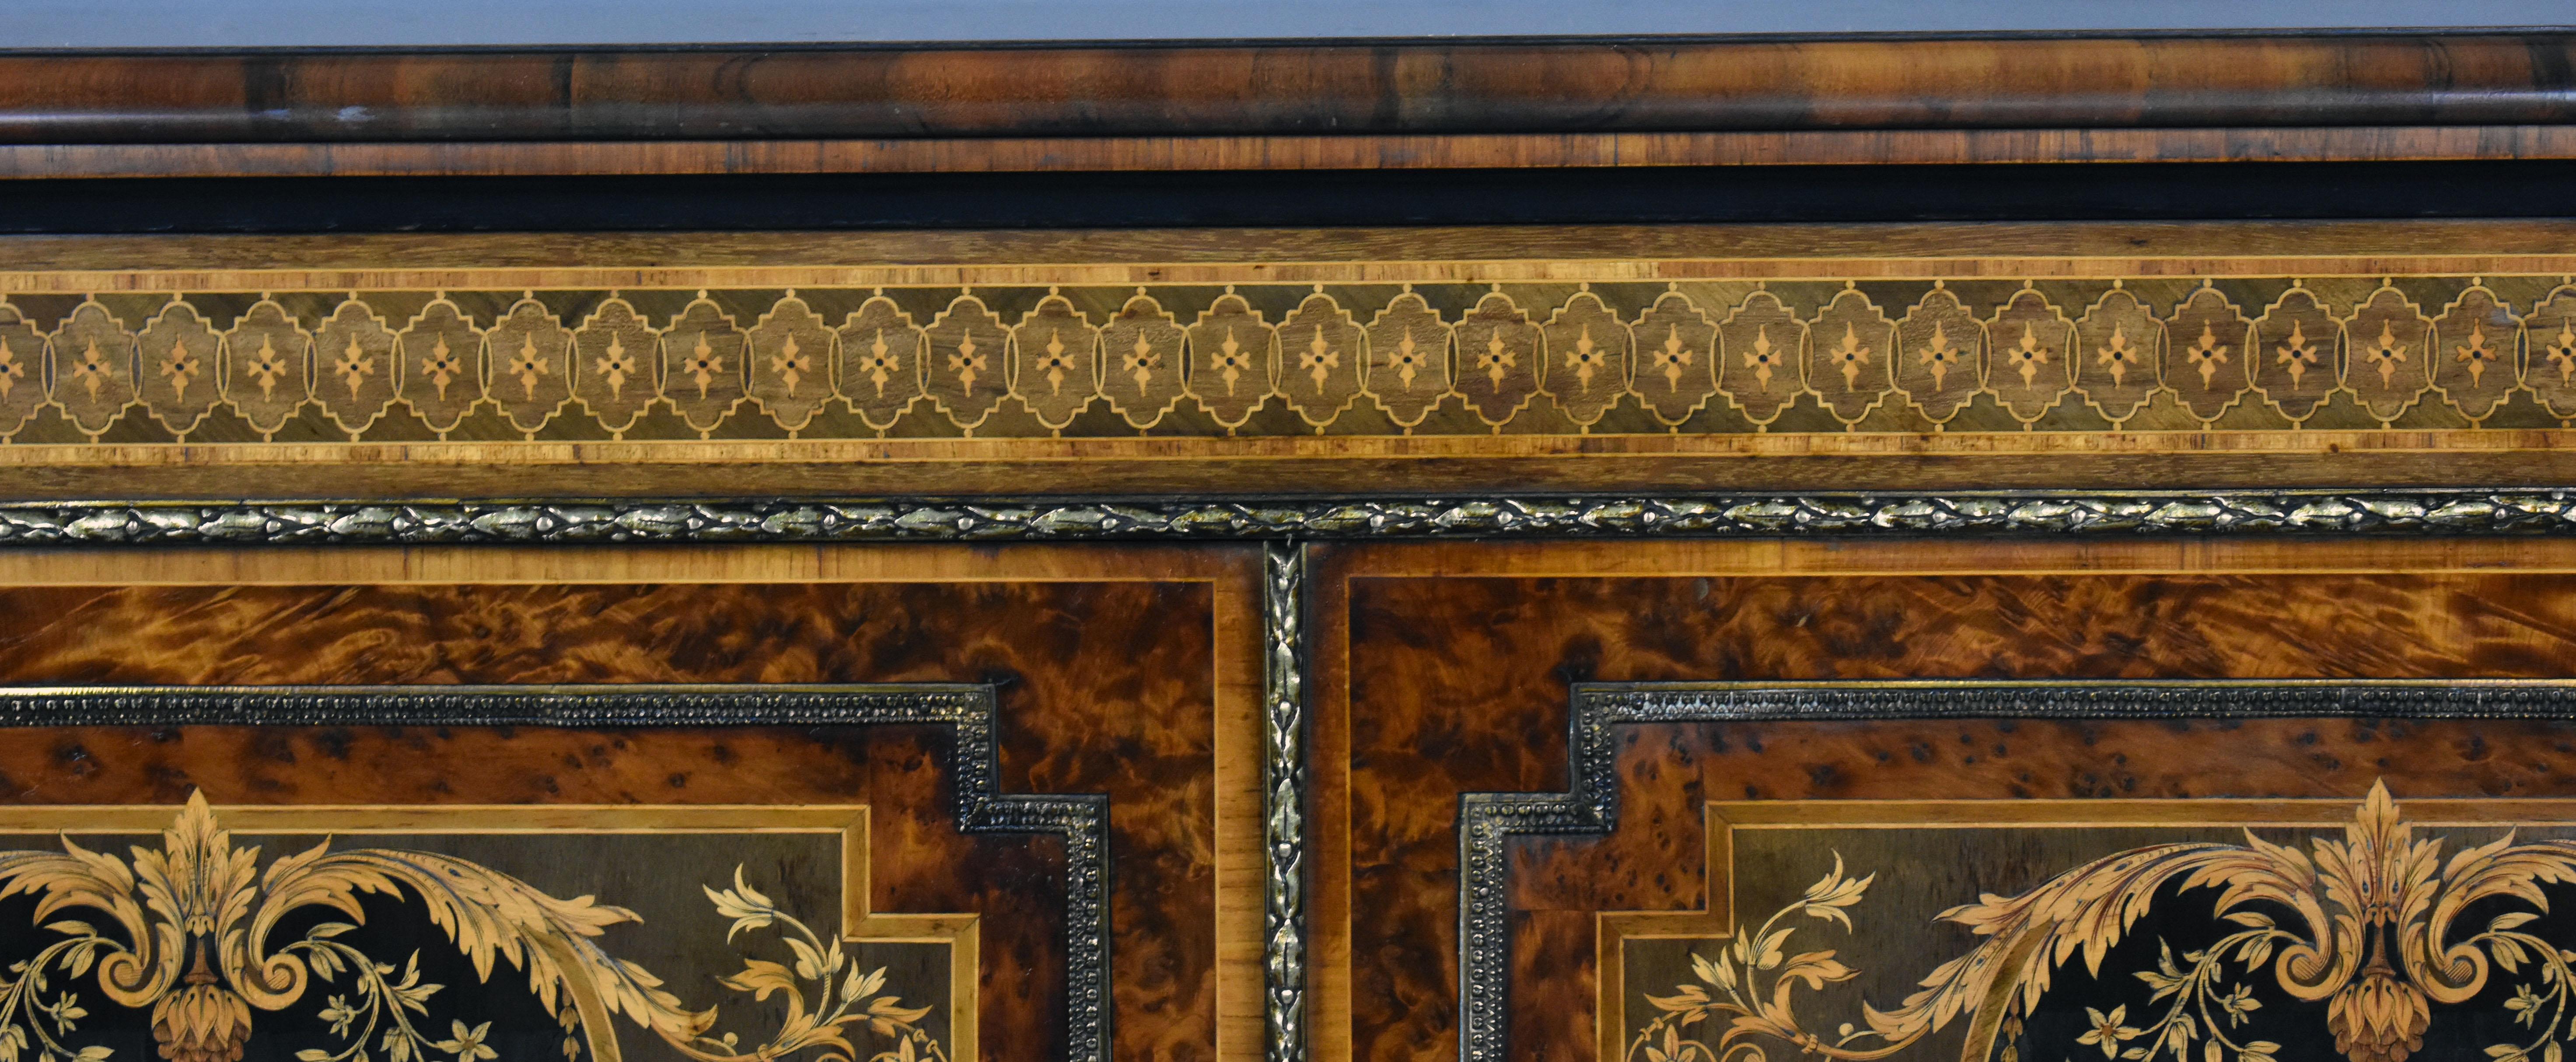 19th Century English Victorian Burl Walnut Marquetry Credenza by Gillow For Sale 10